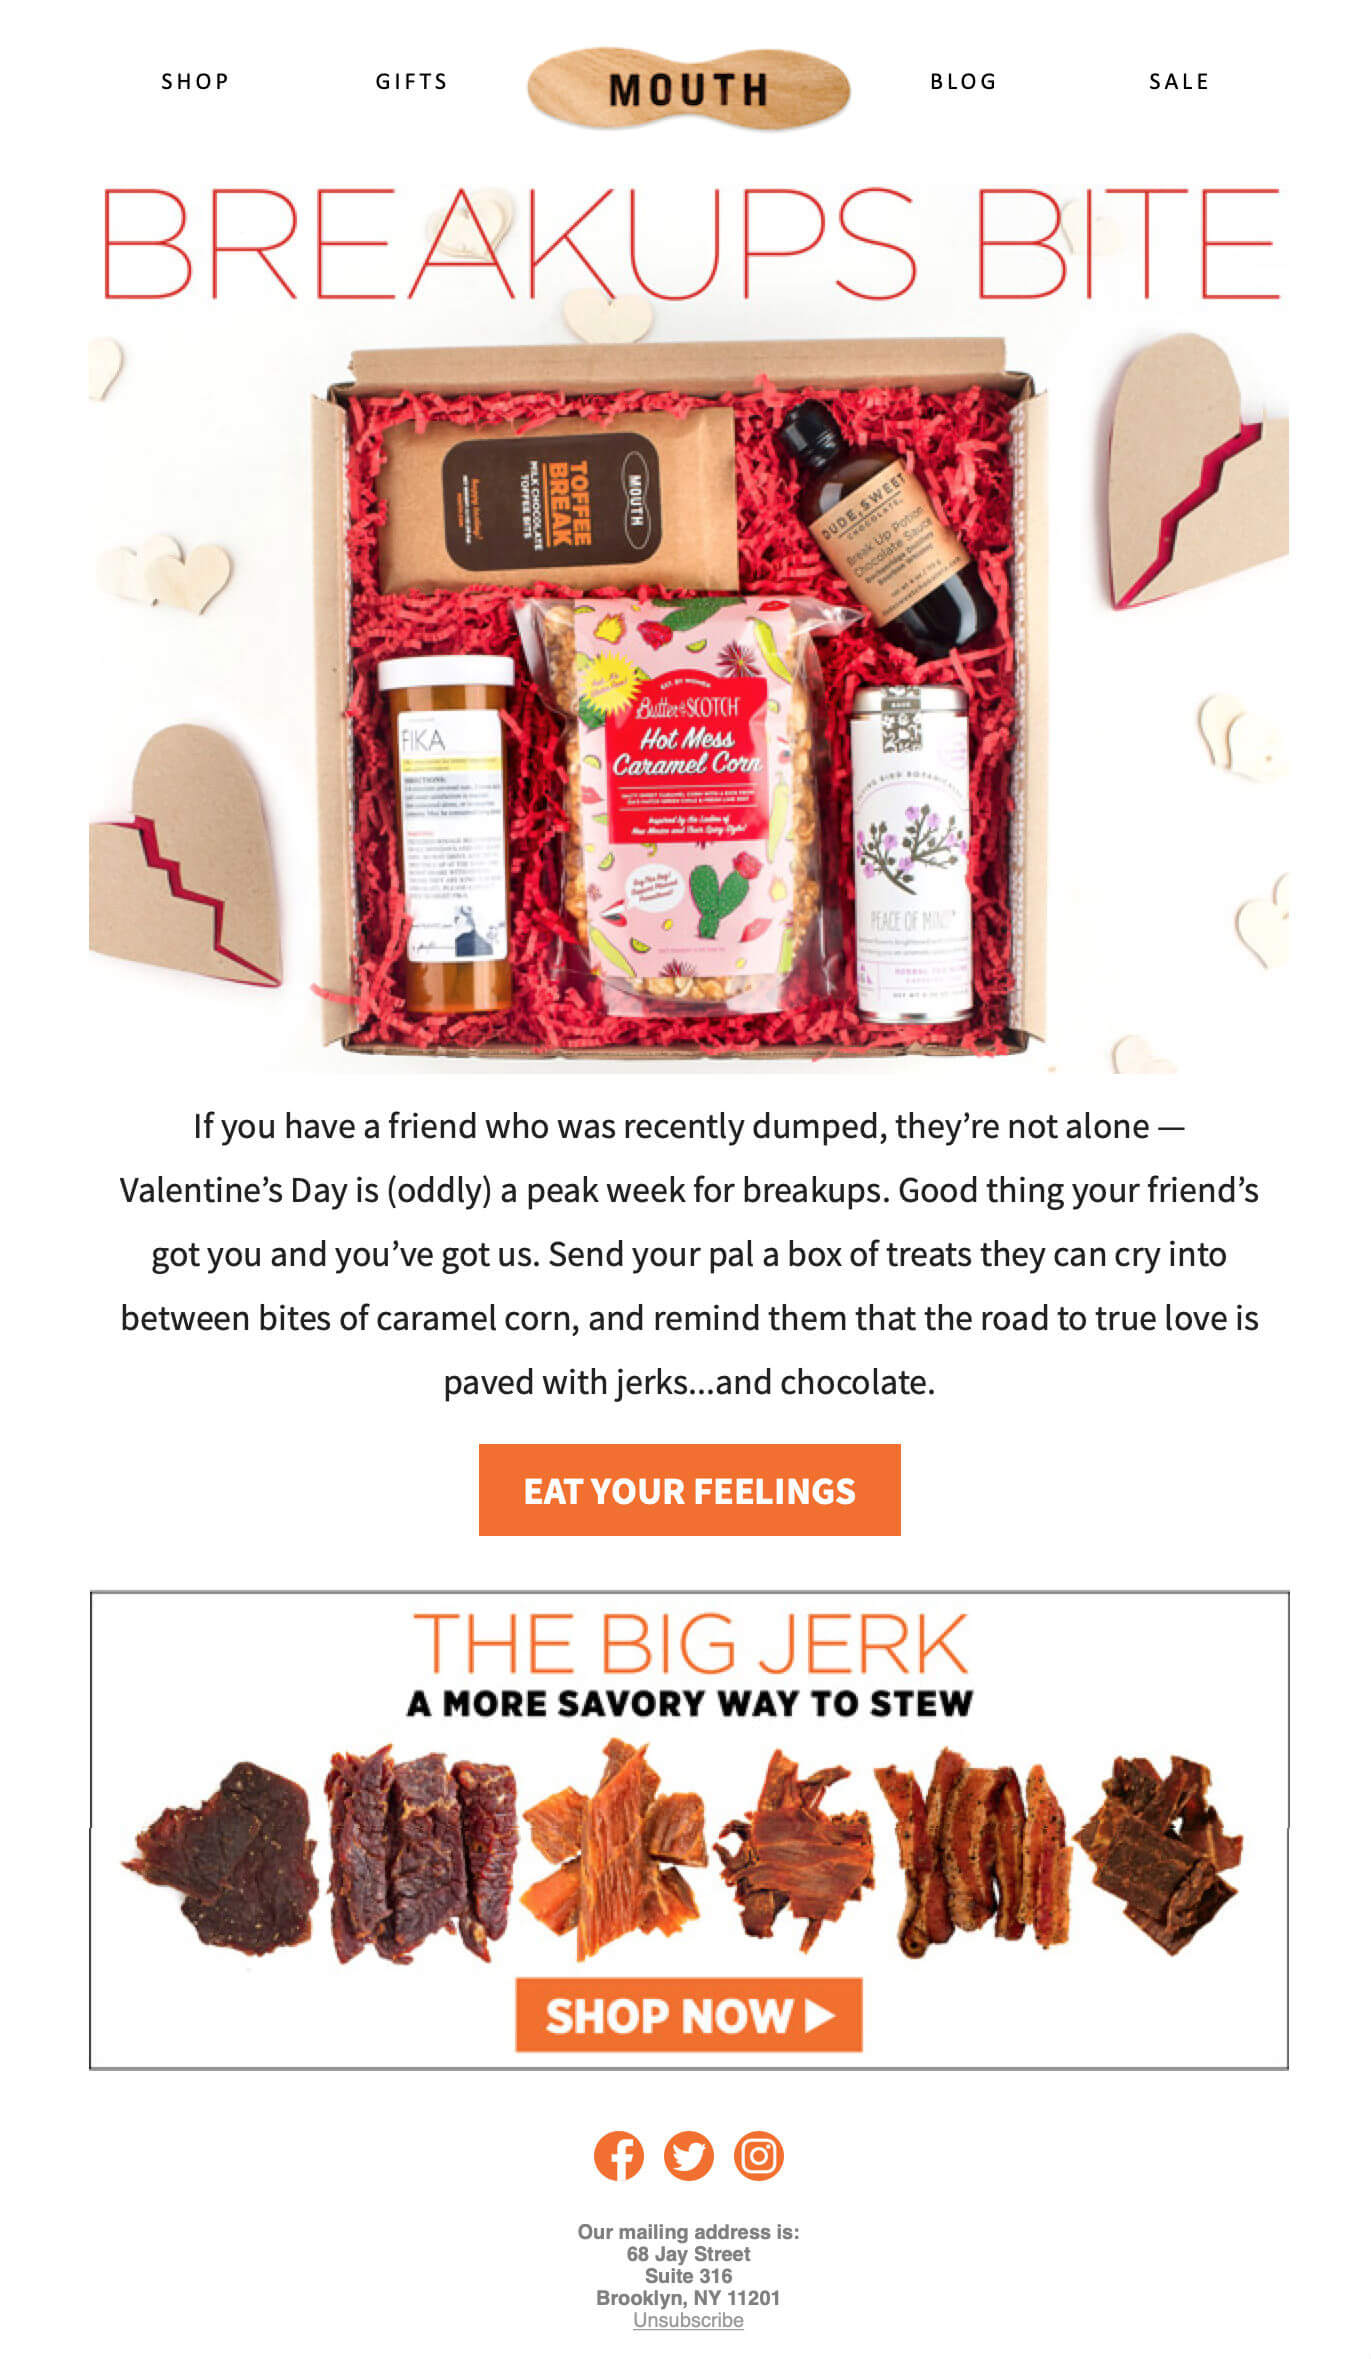 Valentine’s Day email marketing campaign by Mouth